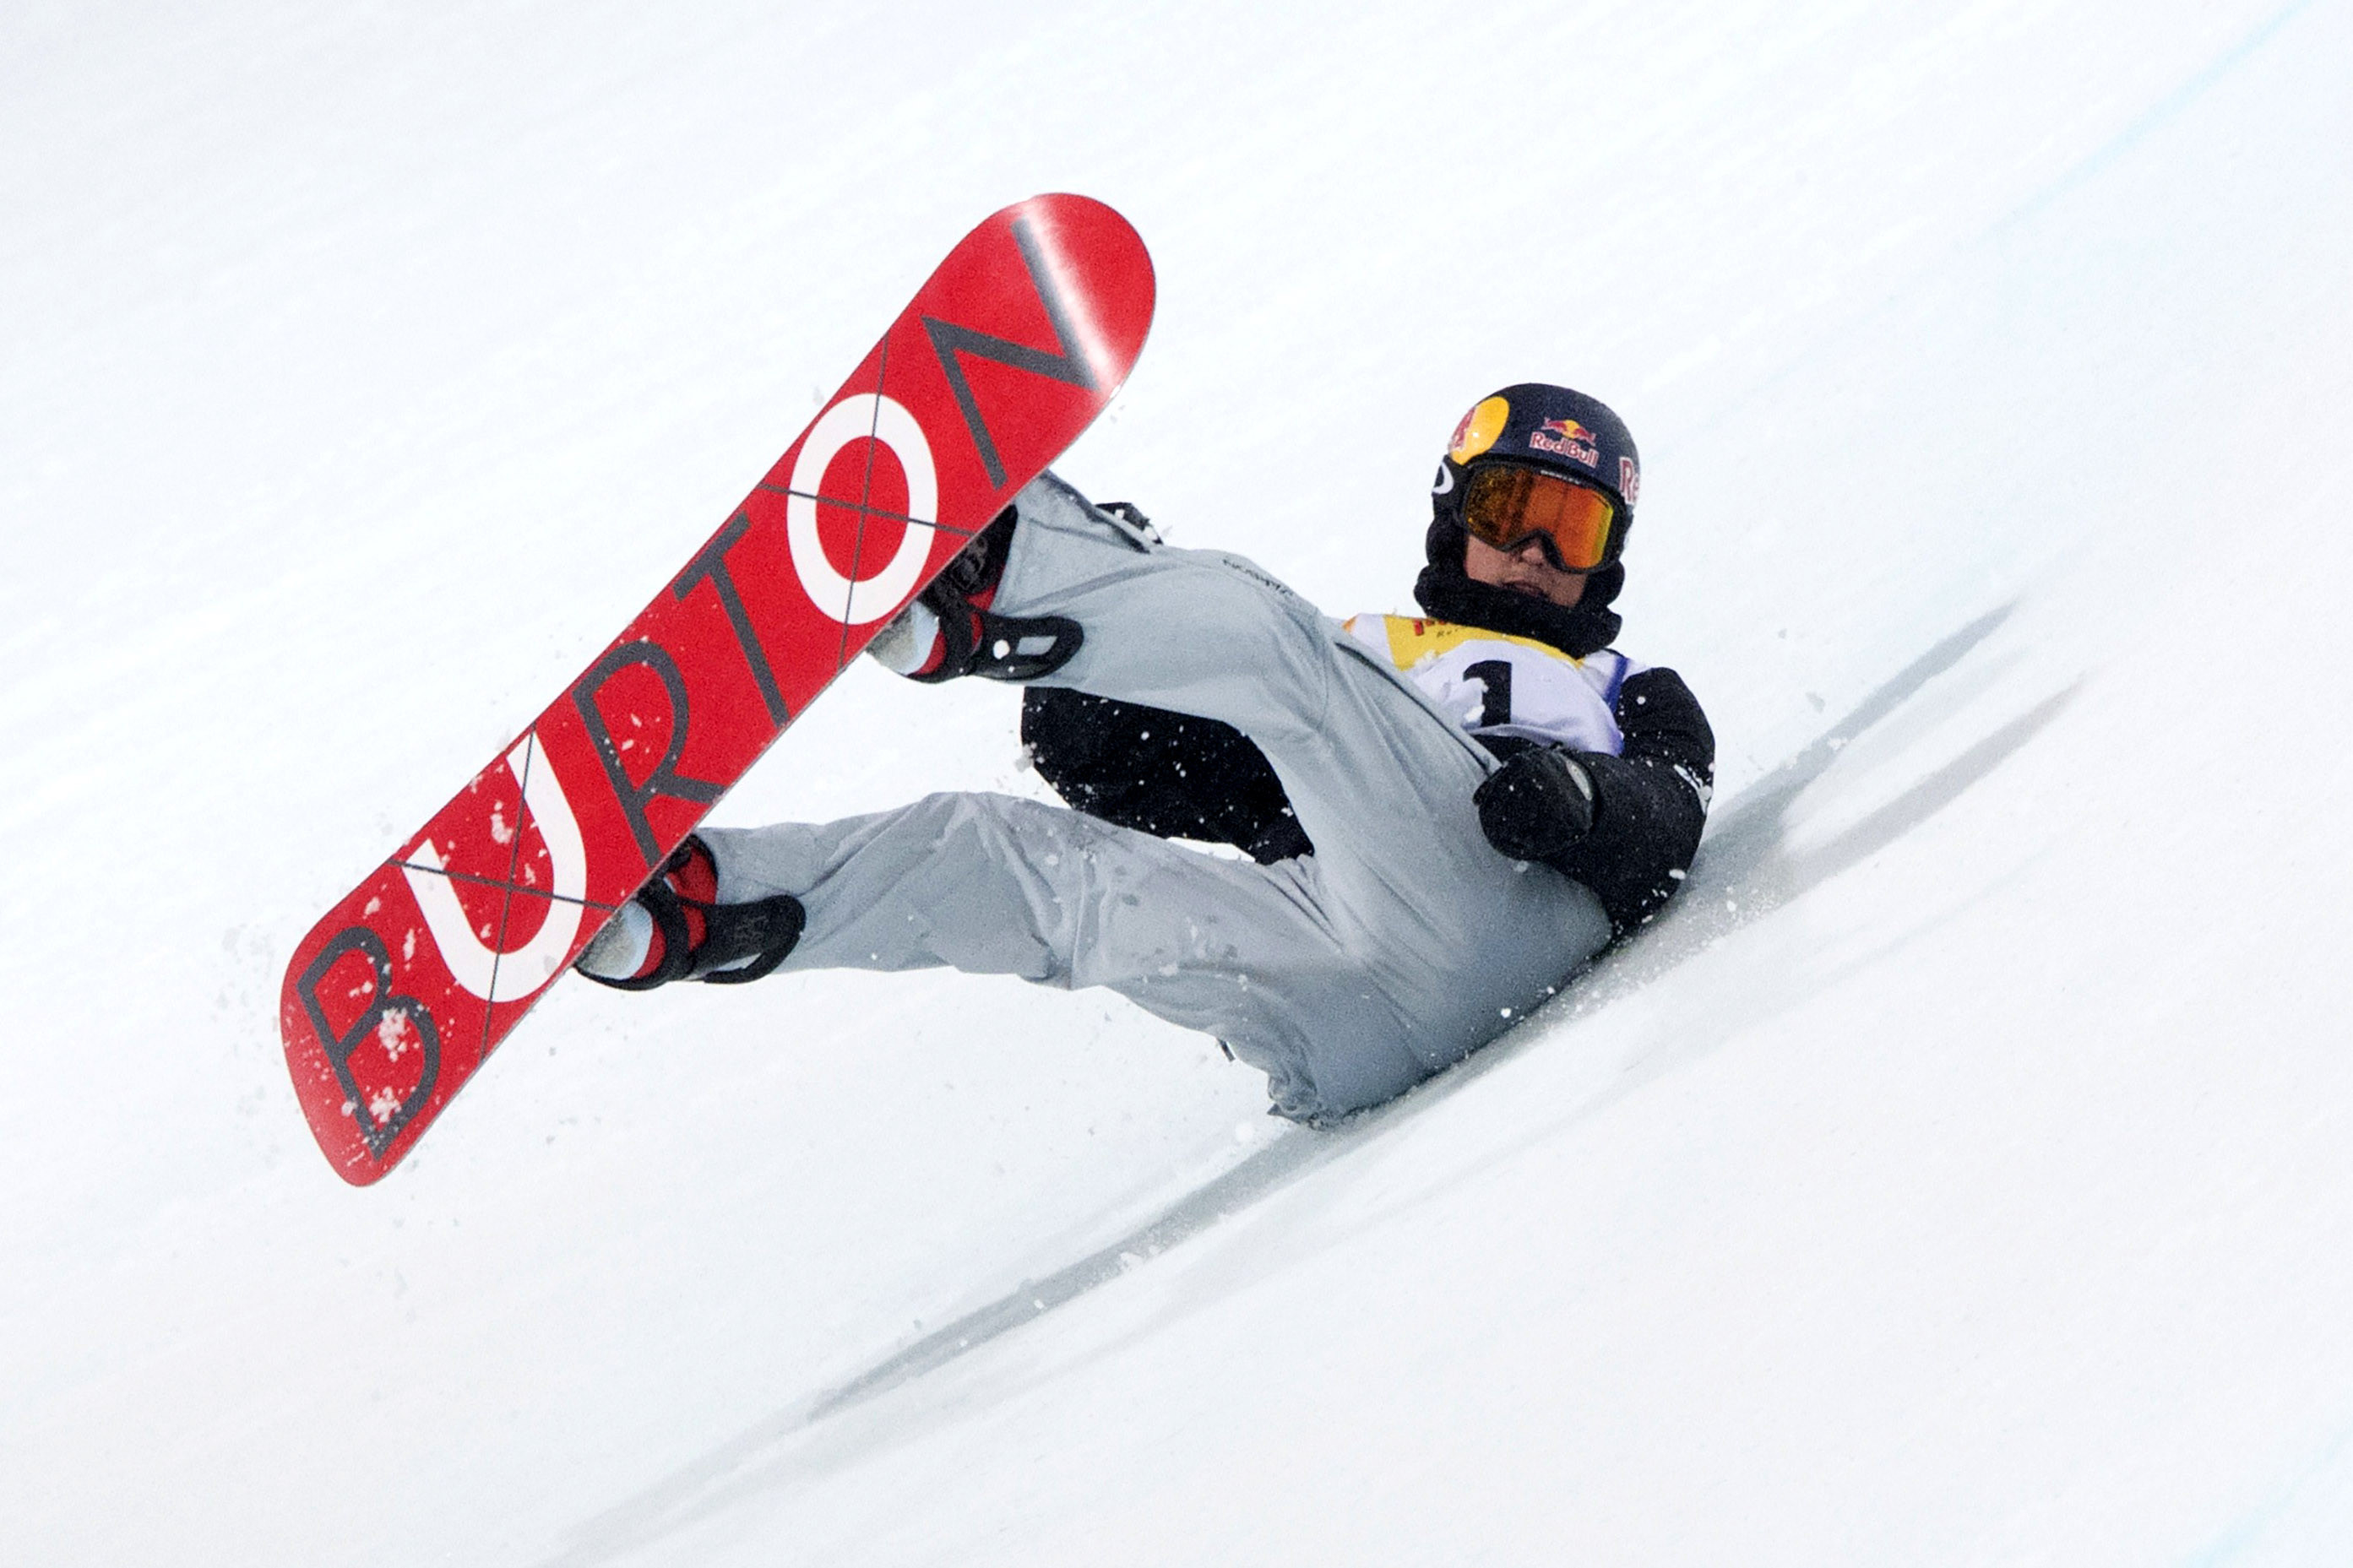 Why snowboarding is fading in popularity